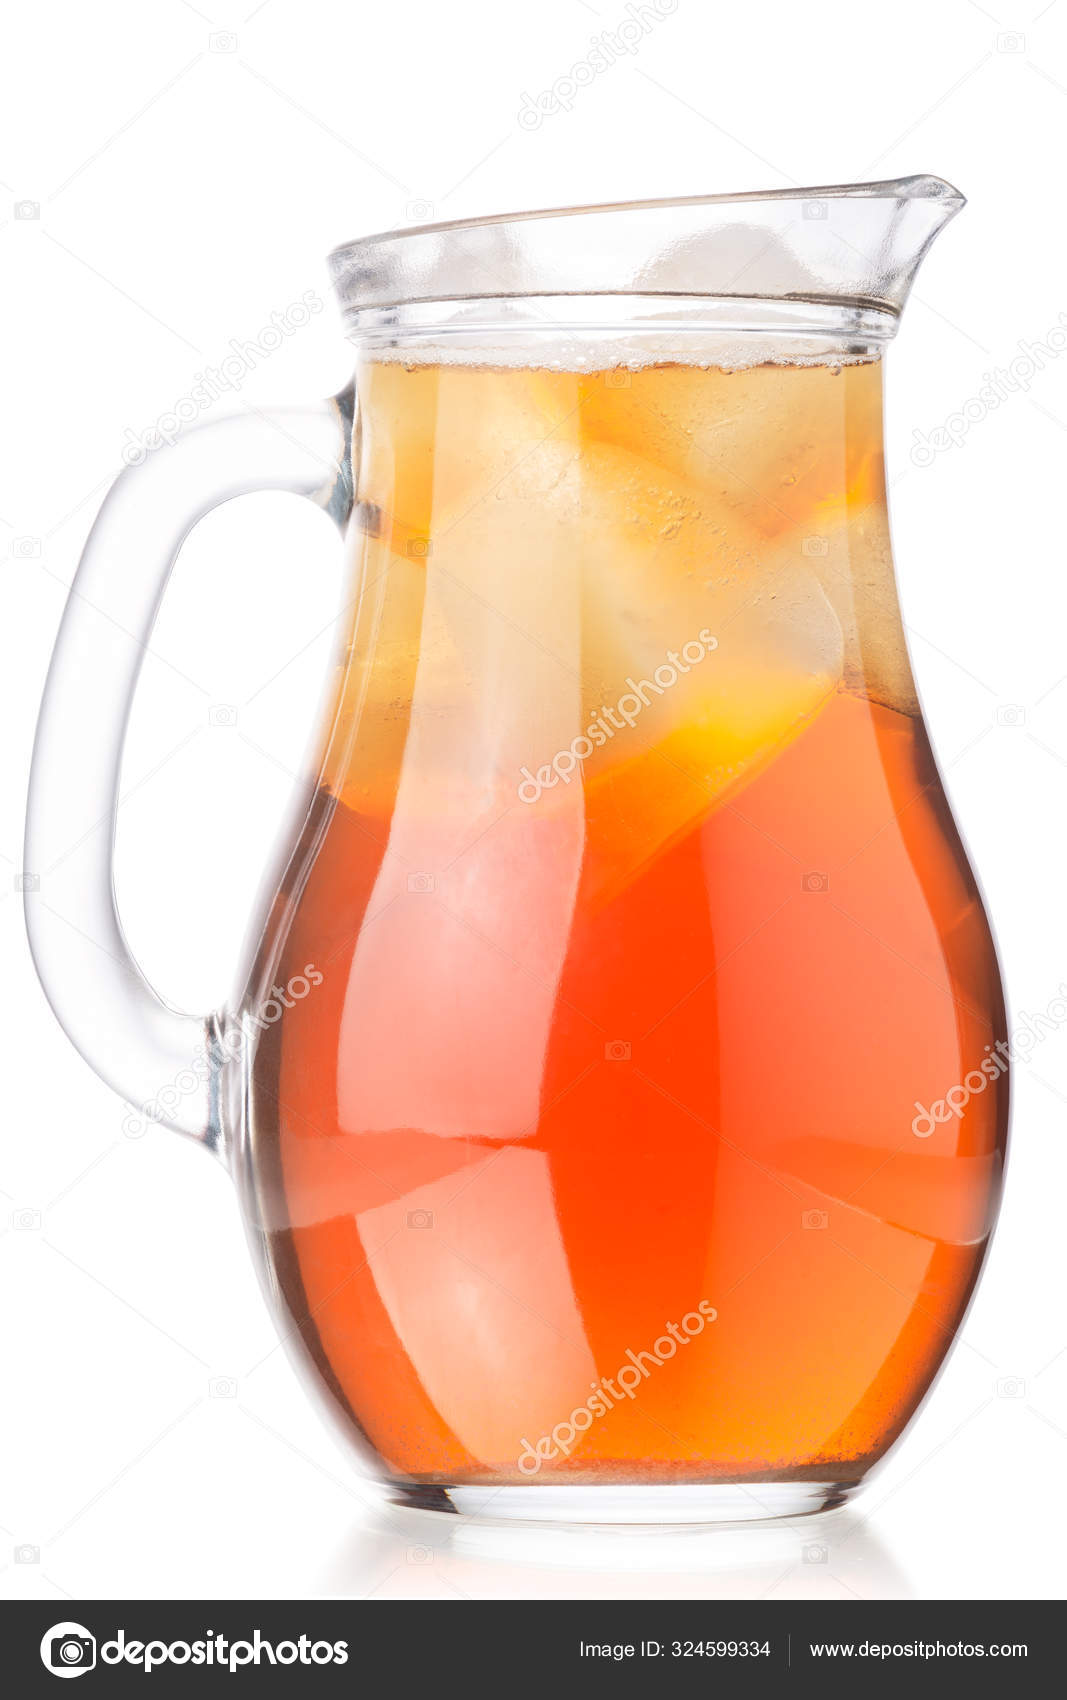 Carrot juice smoothie jug, paths Stock Photo by maxsol7